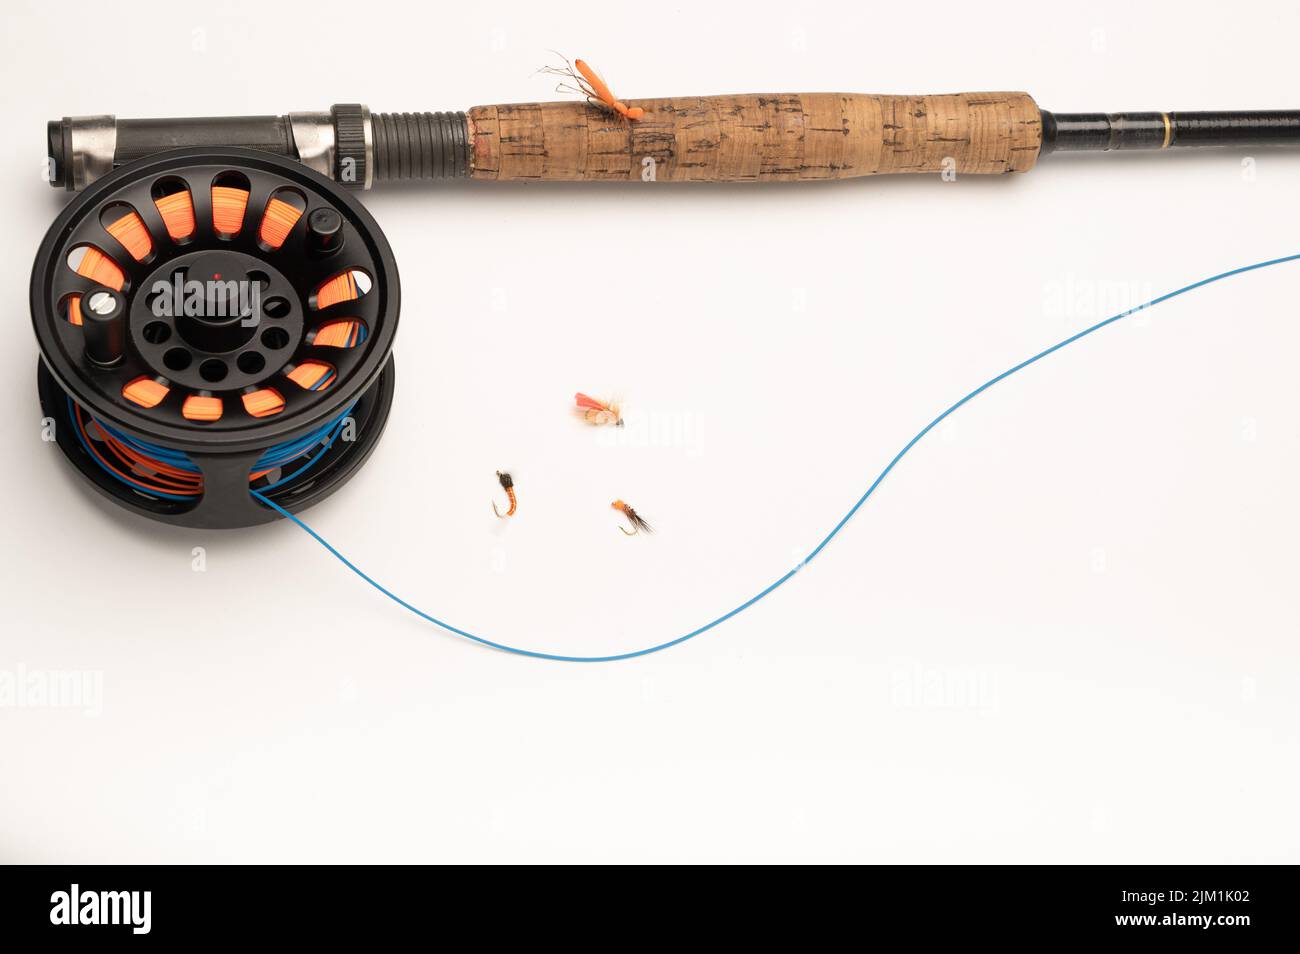 Fly fishing reel, rod, and flies on a white background with copy space Stock Photo